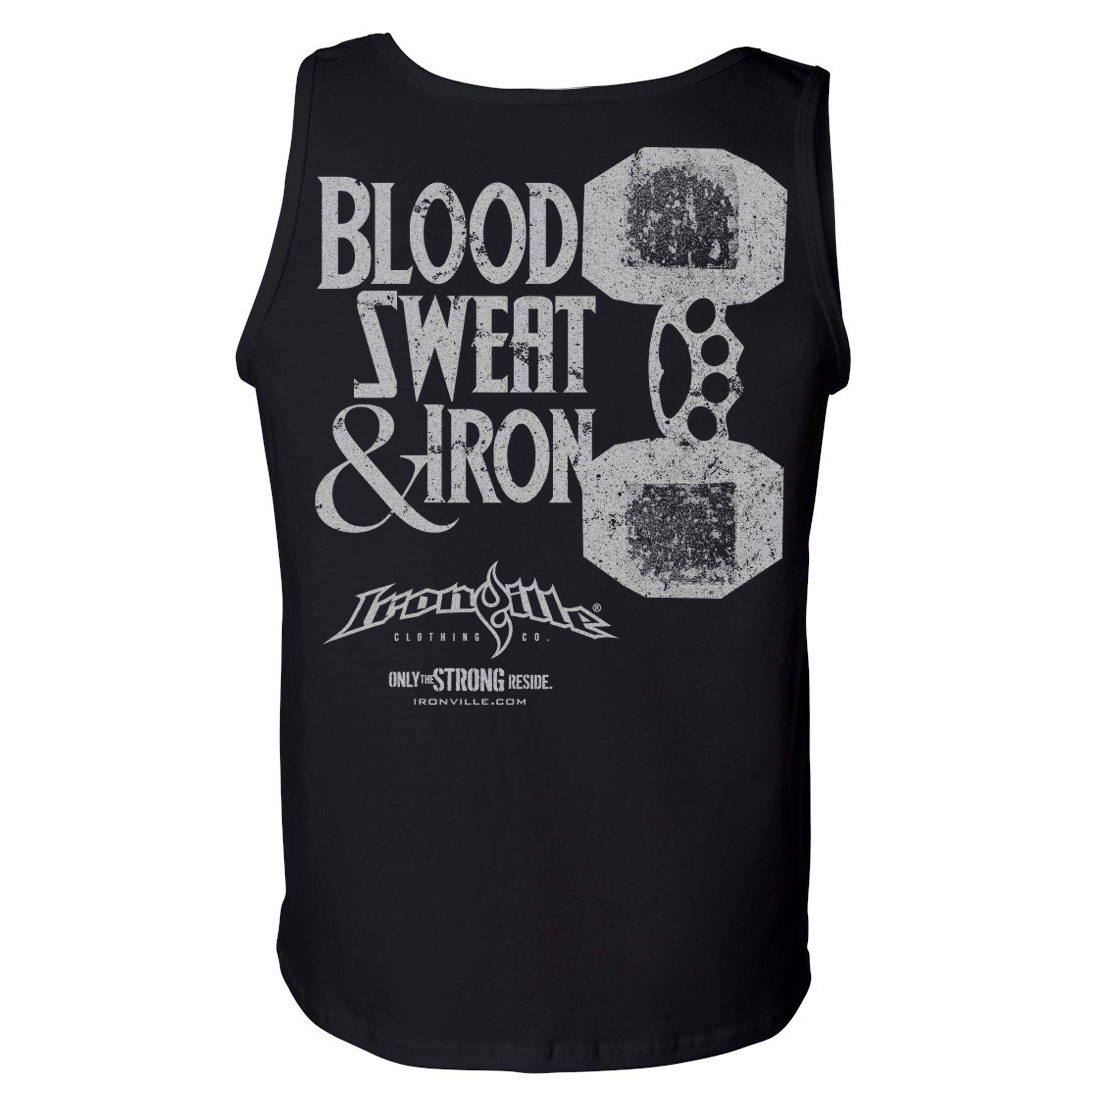 https://www.ironville.com/wp-content/uploads/2015/08/blood-sweat-and-iron-brass-knuckles-dumbbell-weightlifting-tank-top-black.jpg